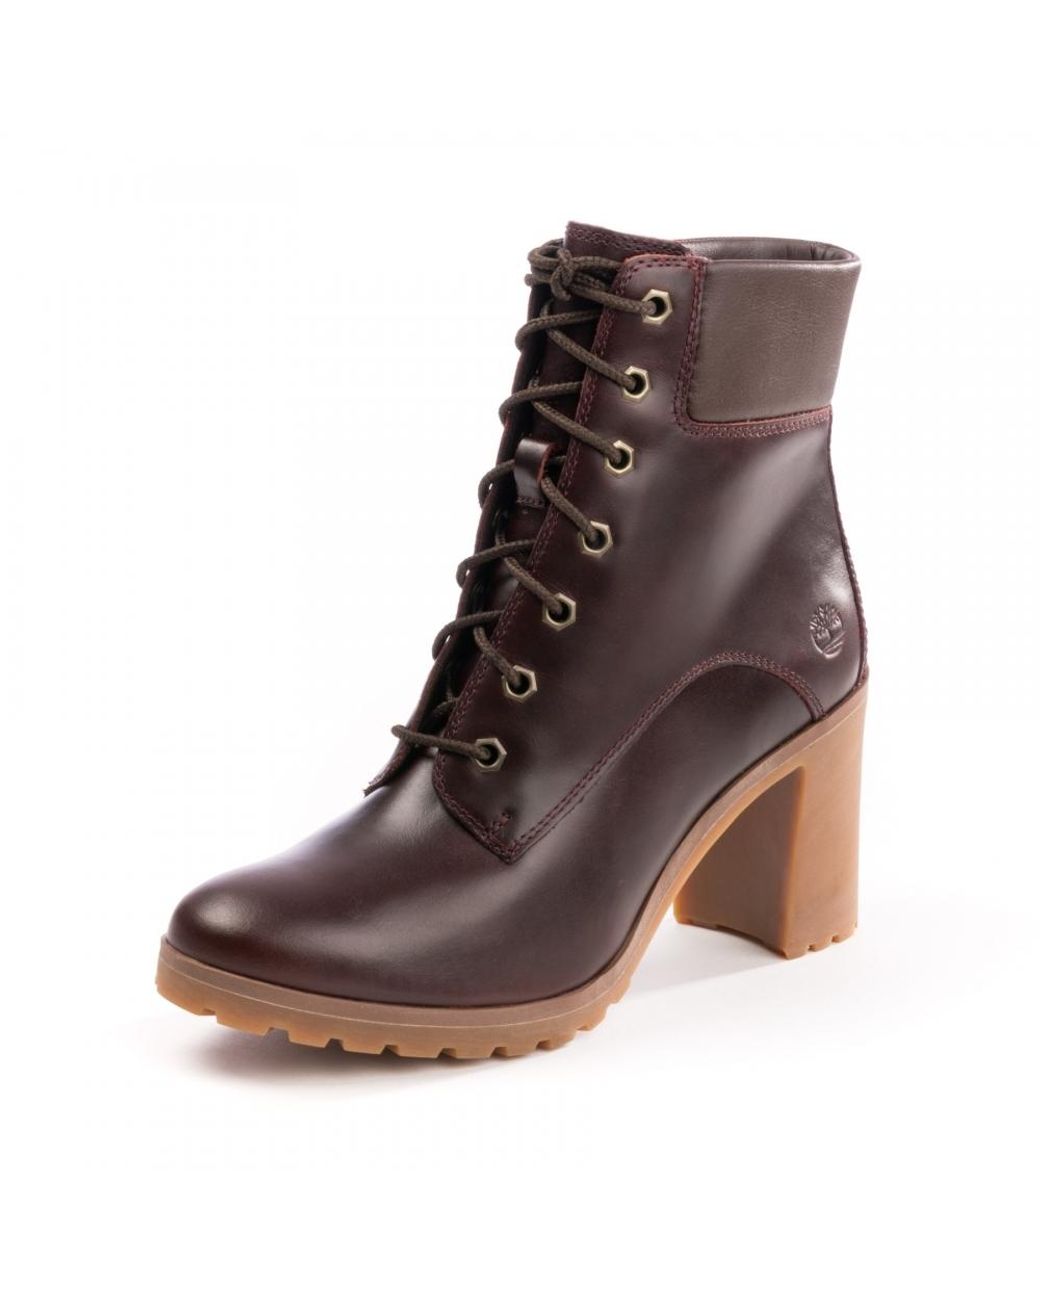 Timberland Rubber Allington 6 Inch Lace Up Boots in Brown | Lyst Australia